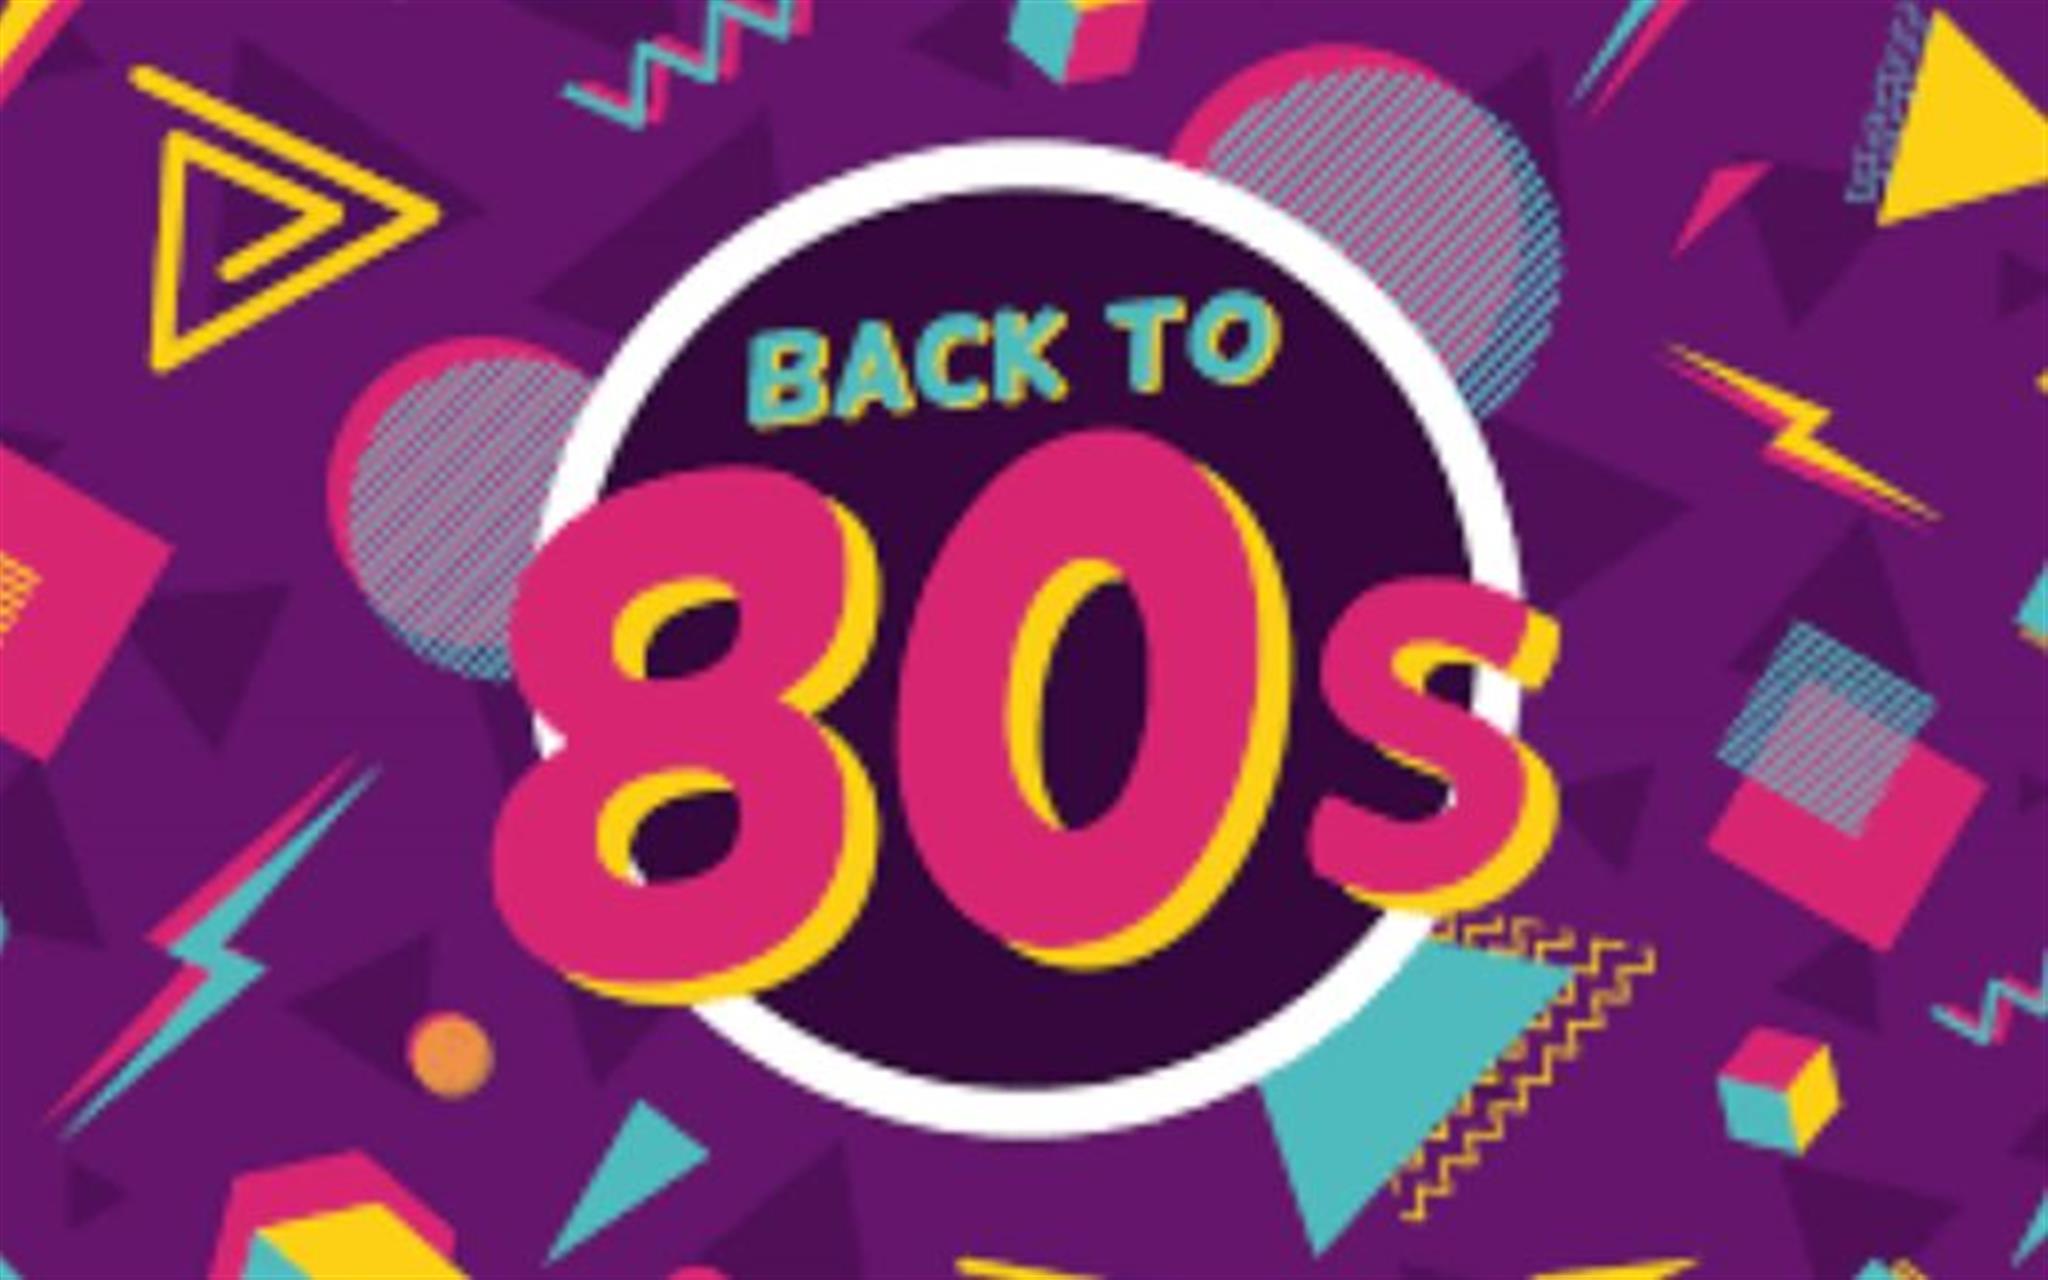 The Ultimate Orchestral 80s Party Night featuring Steven Yallop